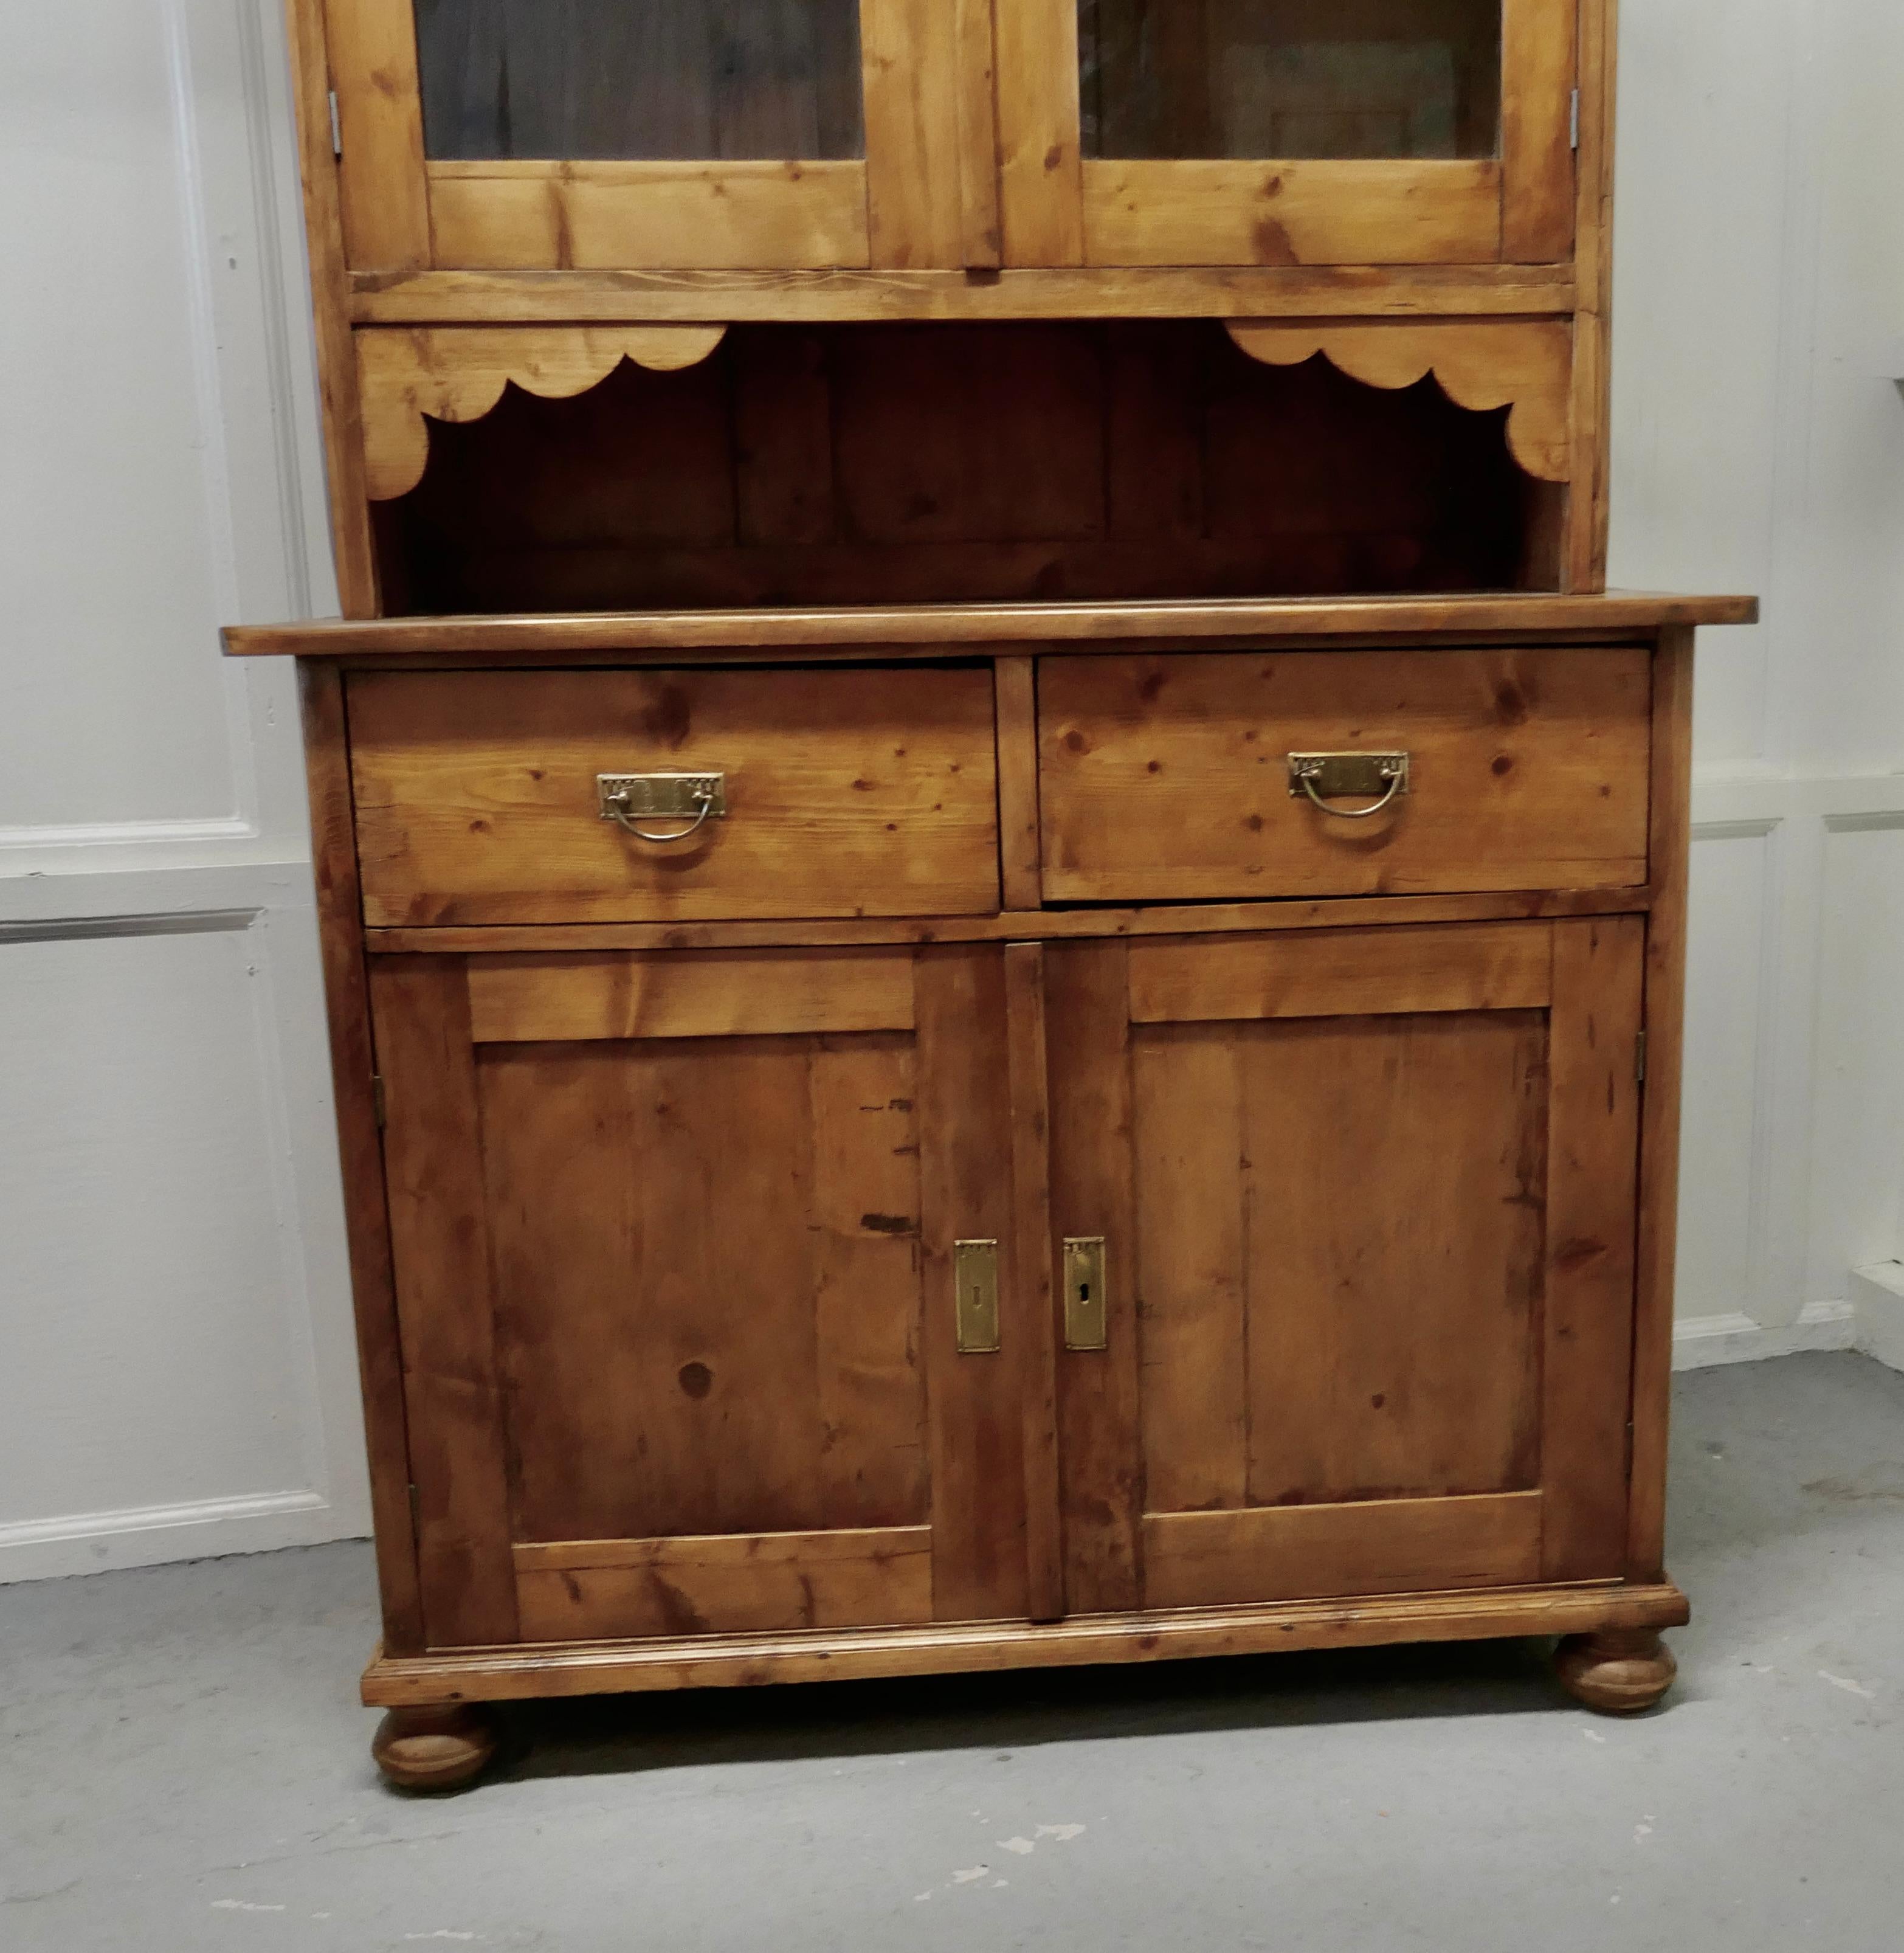 19th century french pine farmhouse kitchen glazed dresser.

This is a good country piece, it dates from the late 19th century
The top section has two Glazed doors enclosing a shelved cupboard, this is set off with a deep cornice.
 
The base of